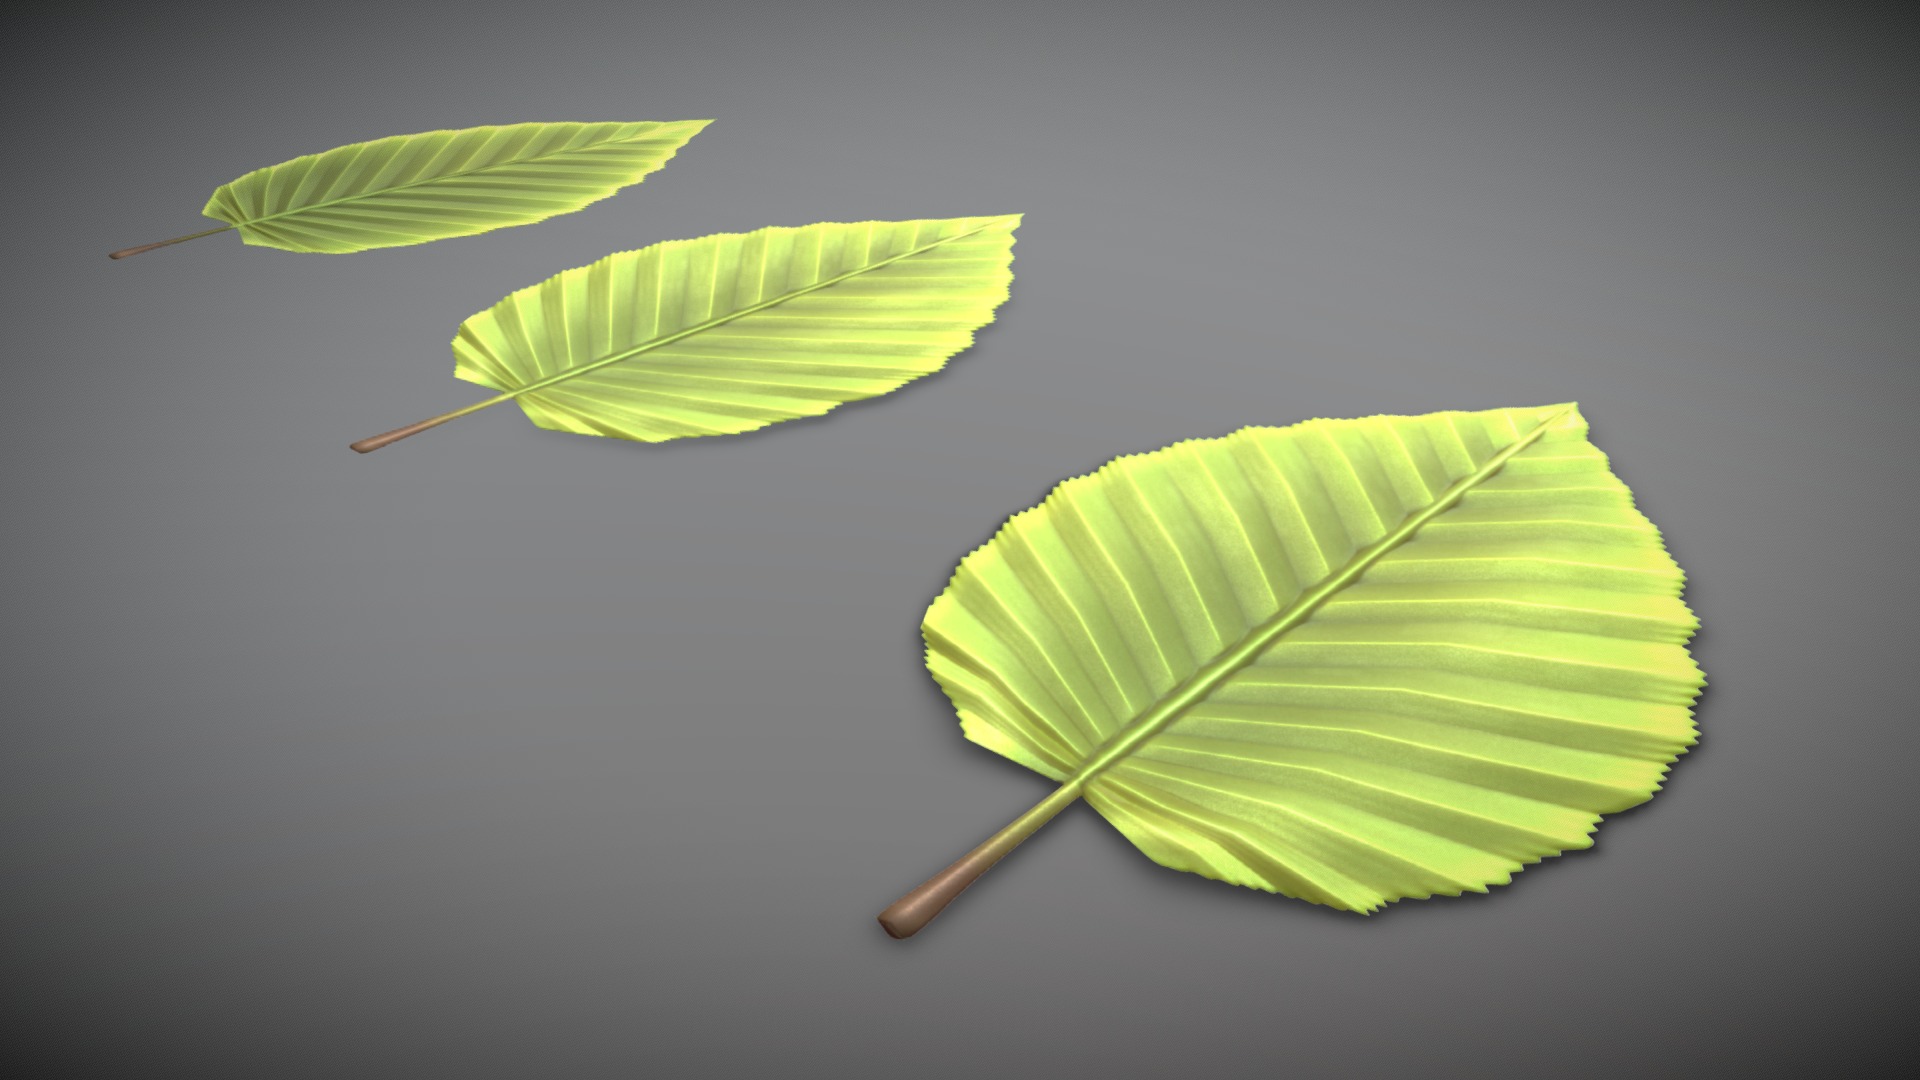 3D model Hornbeam Leaf (Low-Poly) - This is a 3D model of the Hornbeam Leaf (Low-Poly). The 3D model is about a few leaves on a stick.